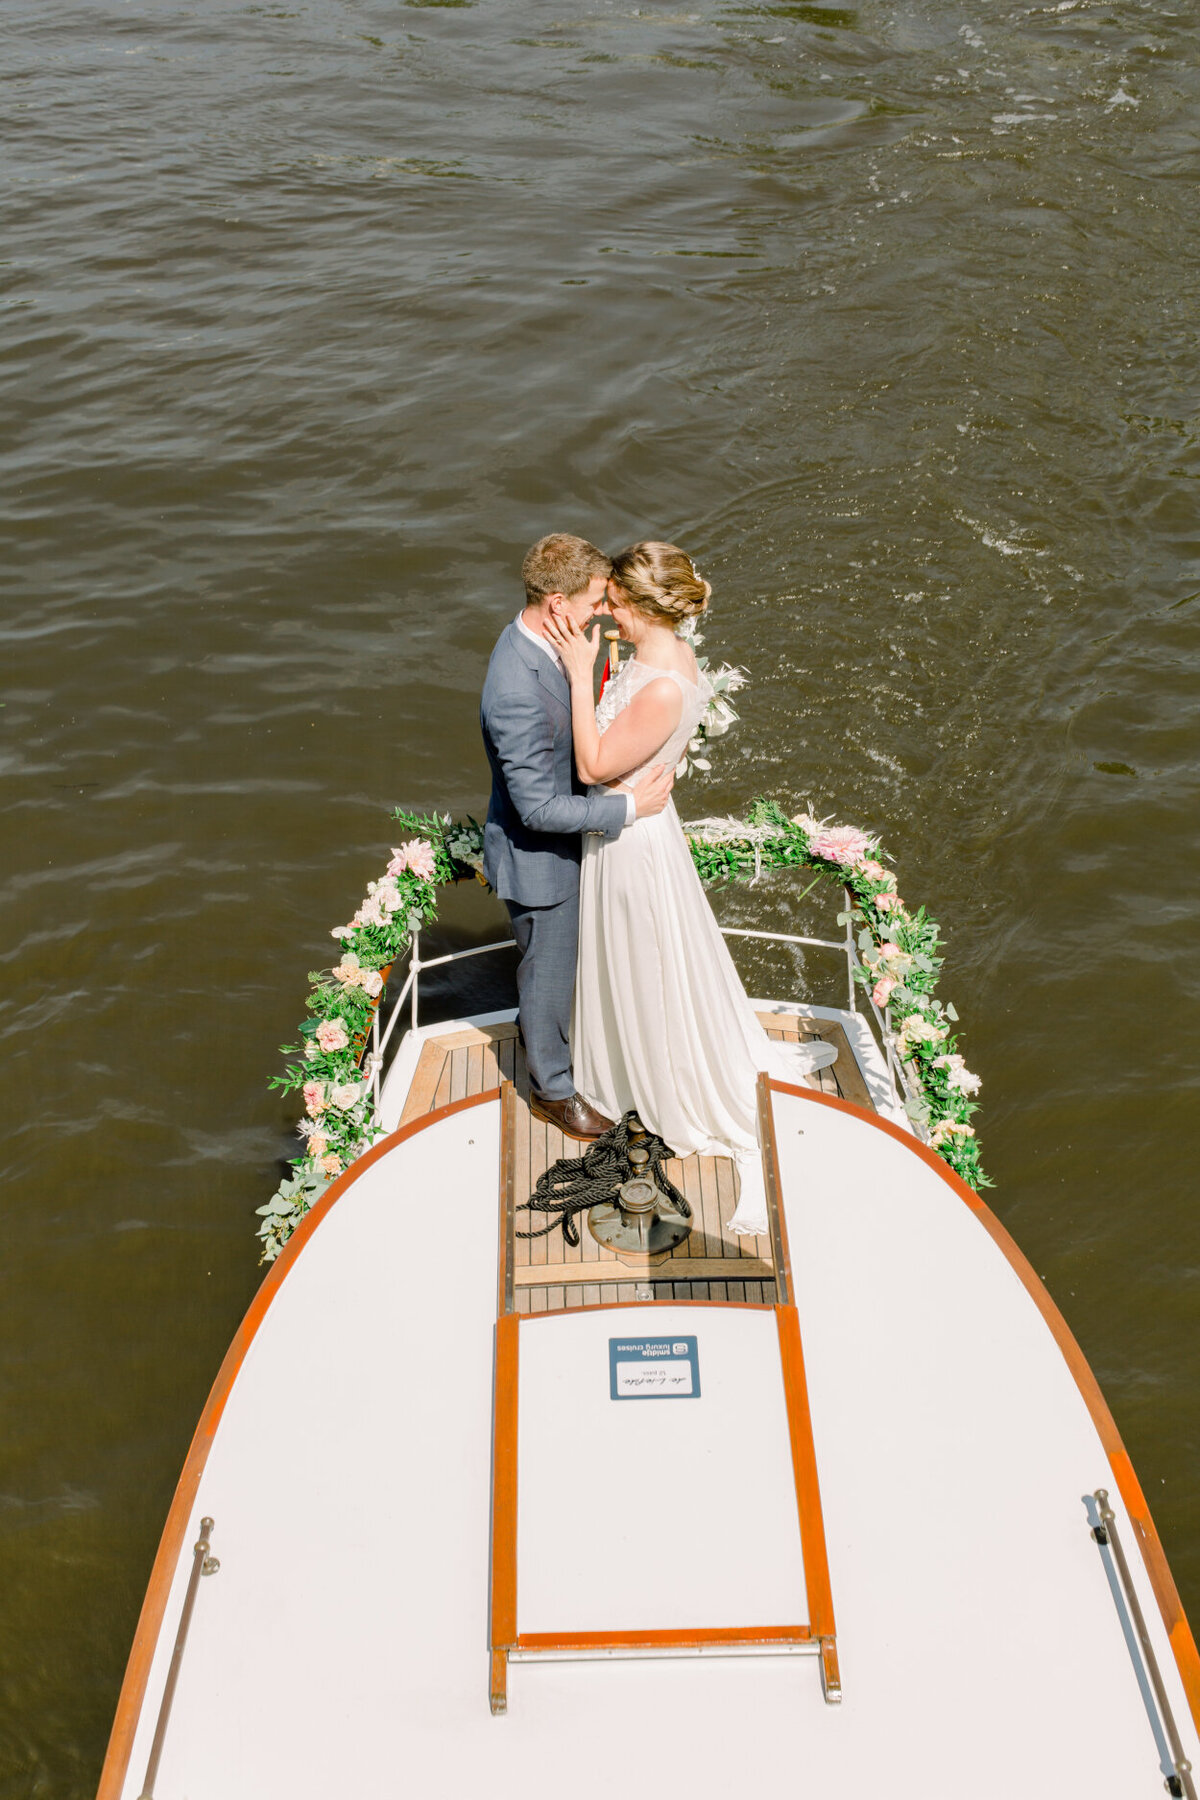 Wedding couple on a canal boat tour in Amsterdam for a photo shoot organized by Lovely & Planned